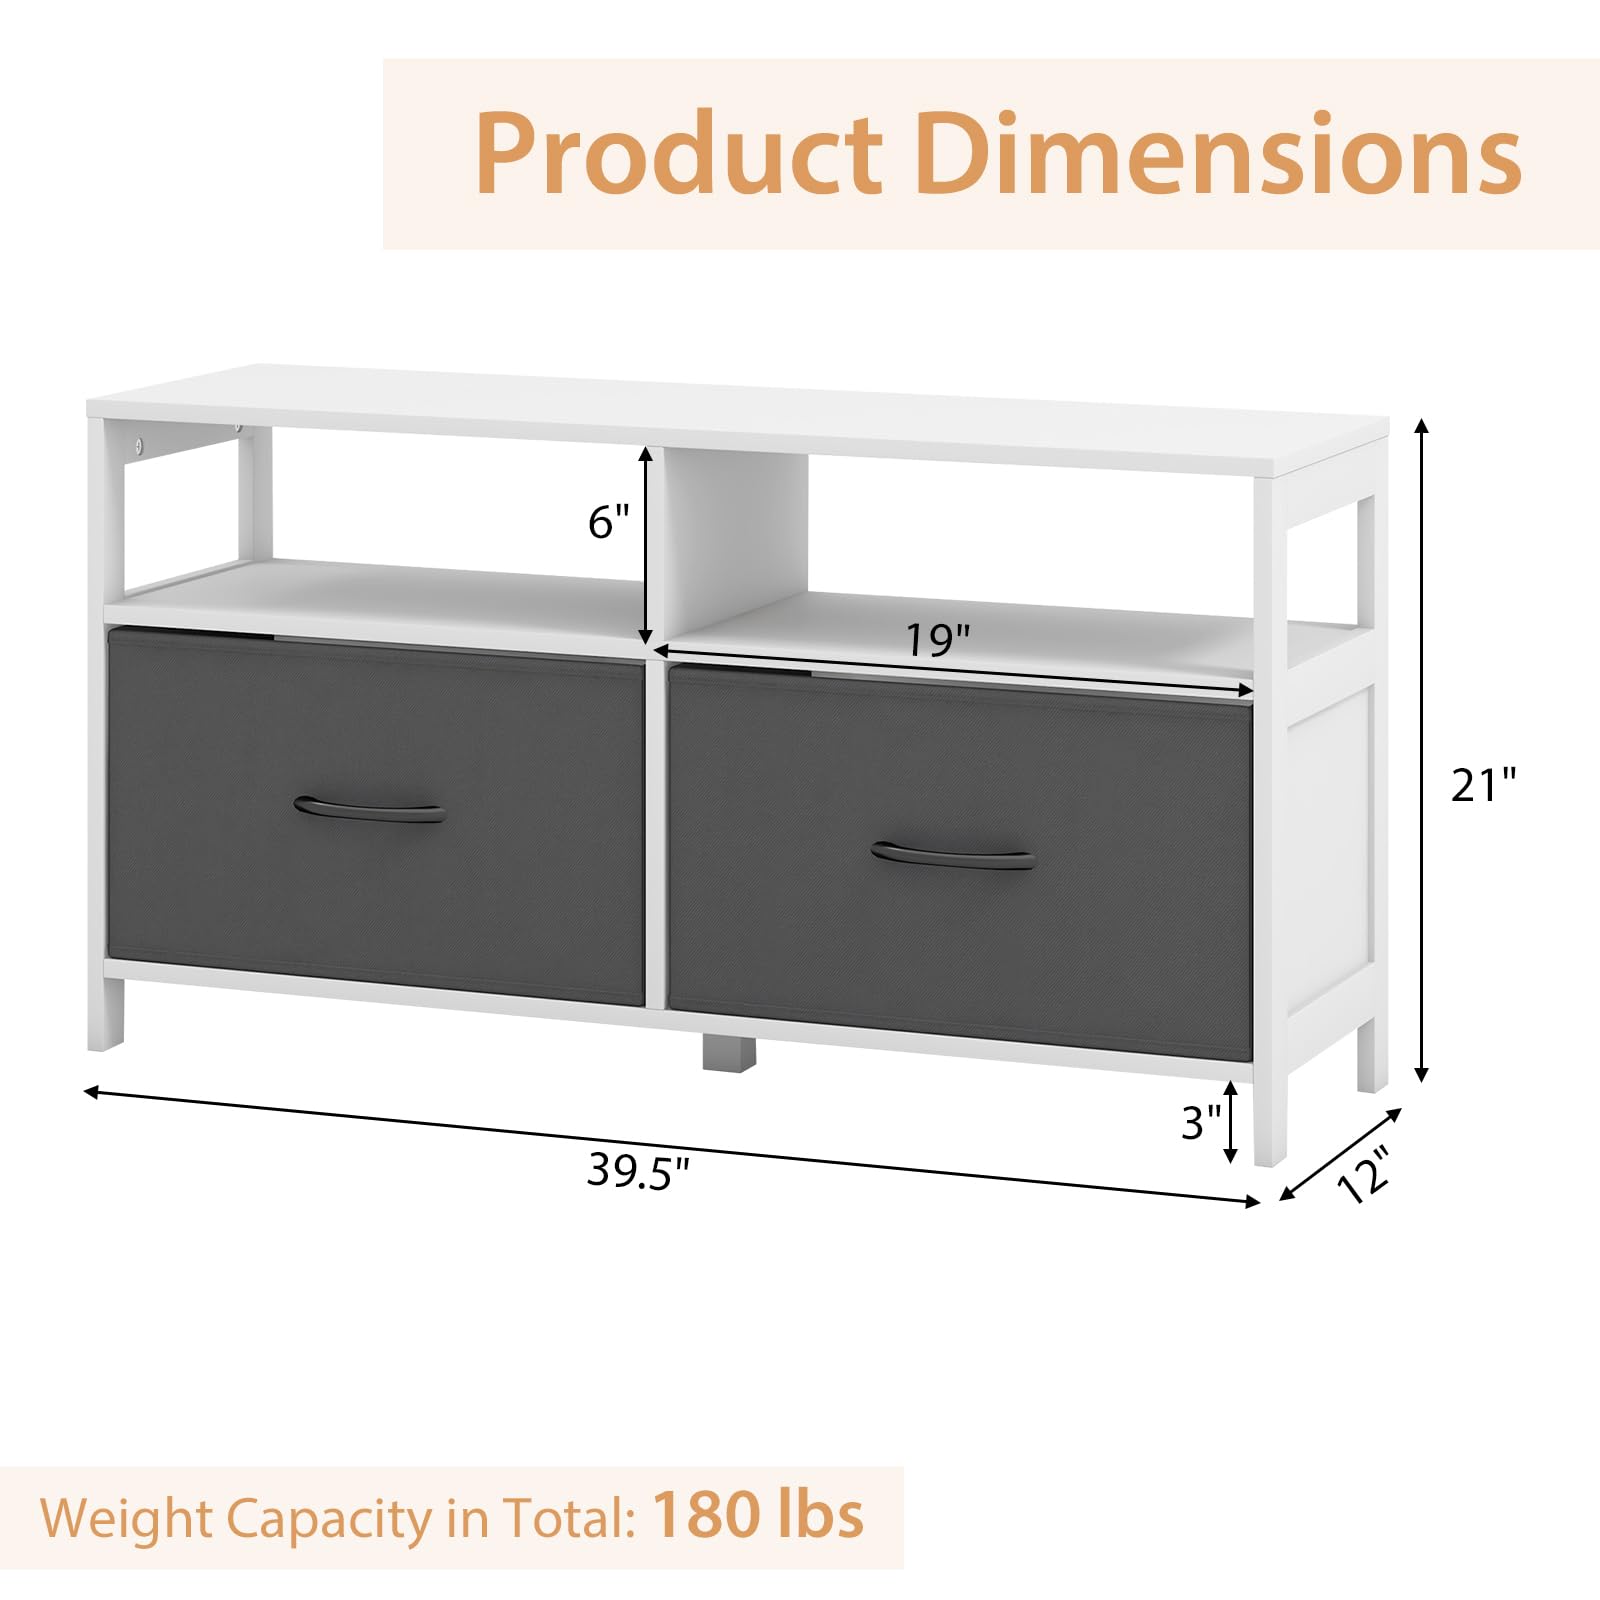 Giantex TV Stand for Bedroom, Storage Cabinet with 2 Open Shelves, 2 Removable Fabric Drawers